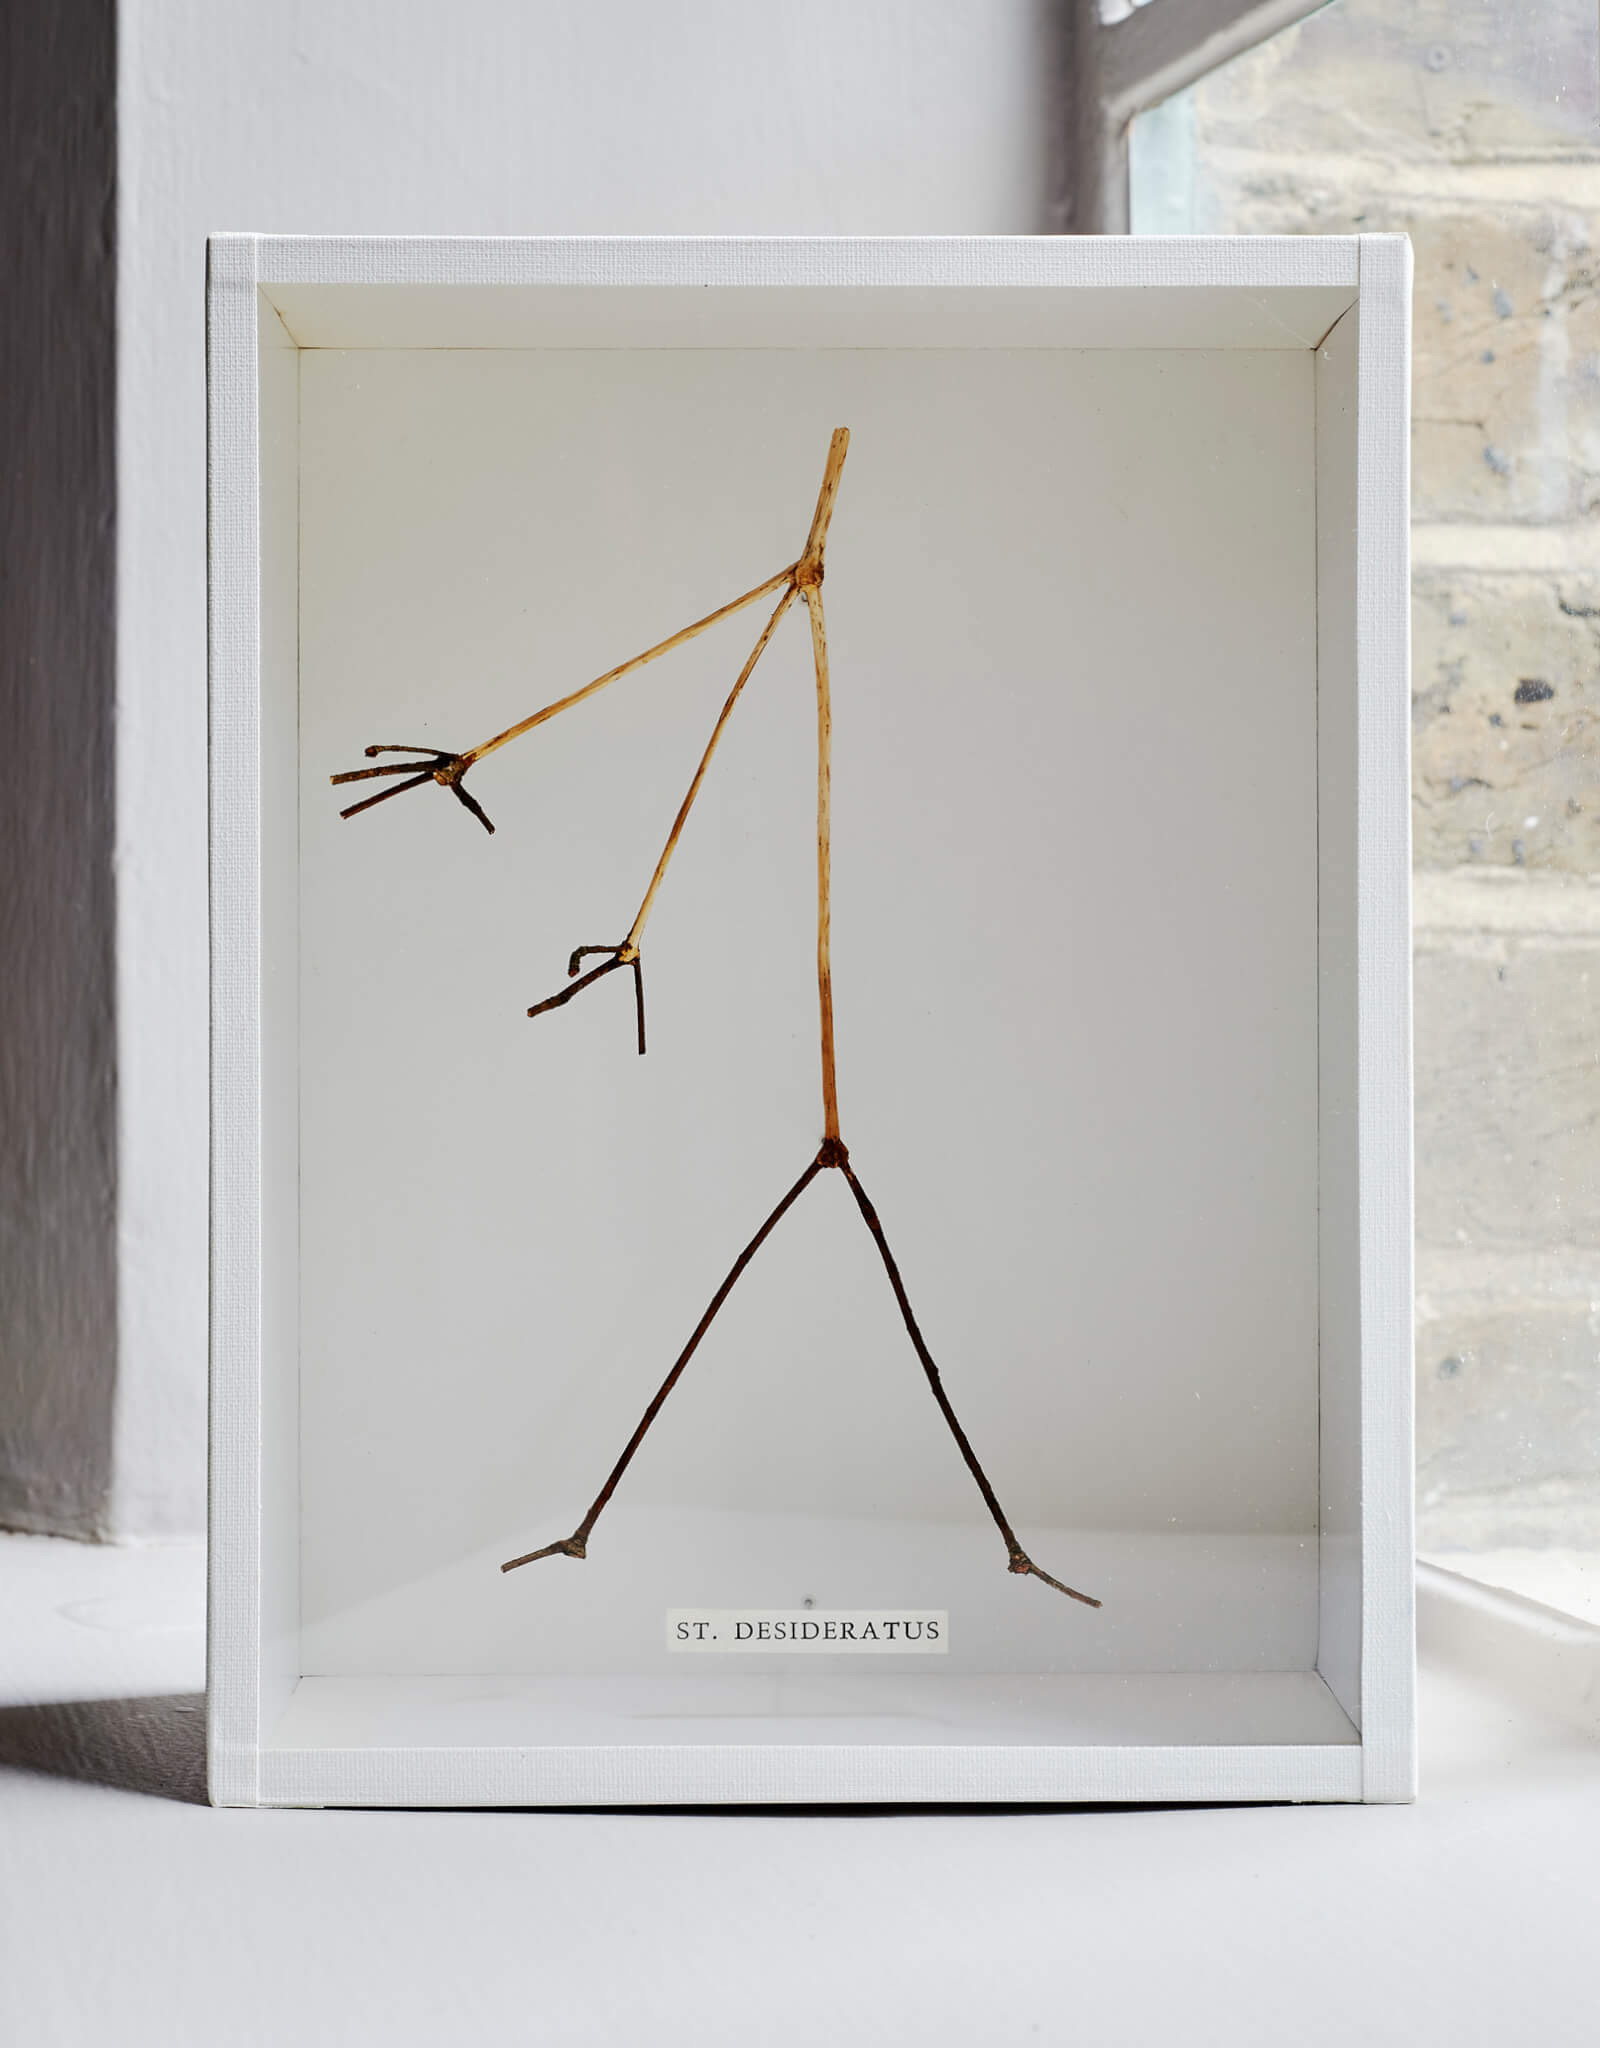 Using Found Twigs, Artist Chris Kenny Assembles Tiny Dancing Figures and Minimal Portraits